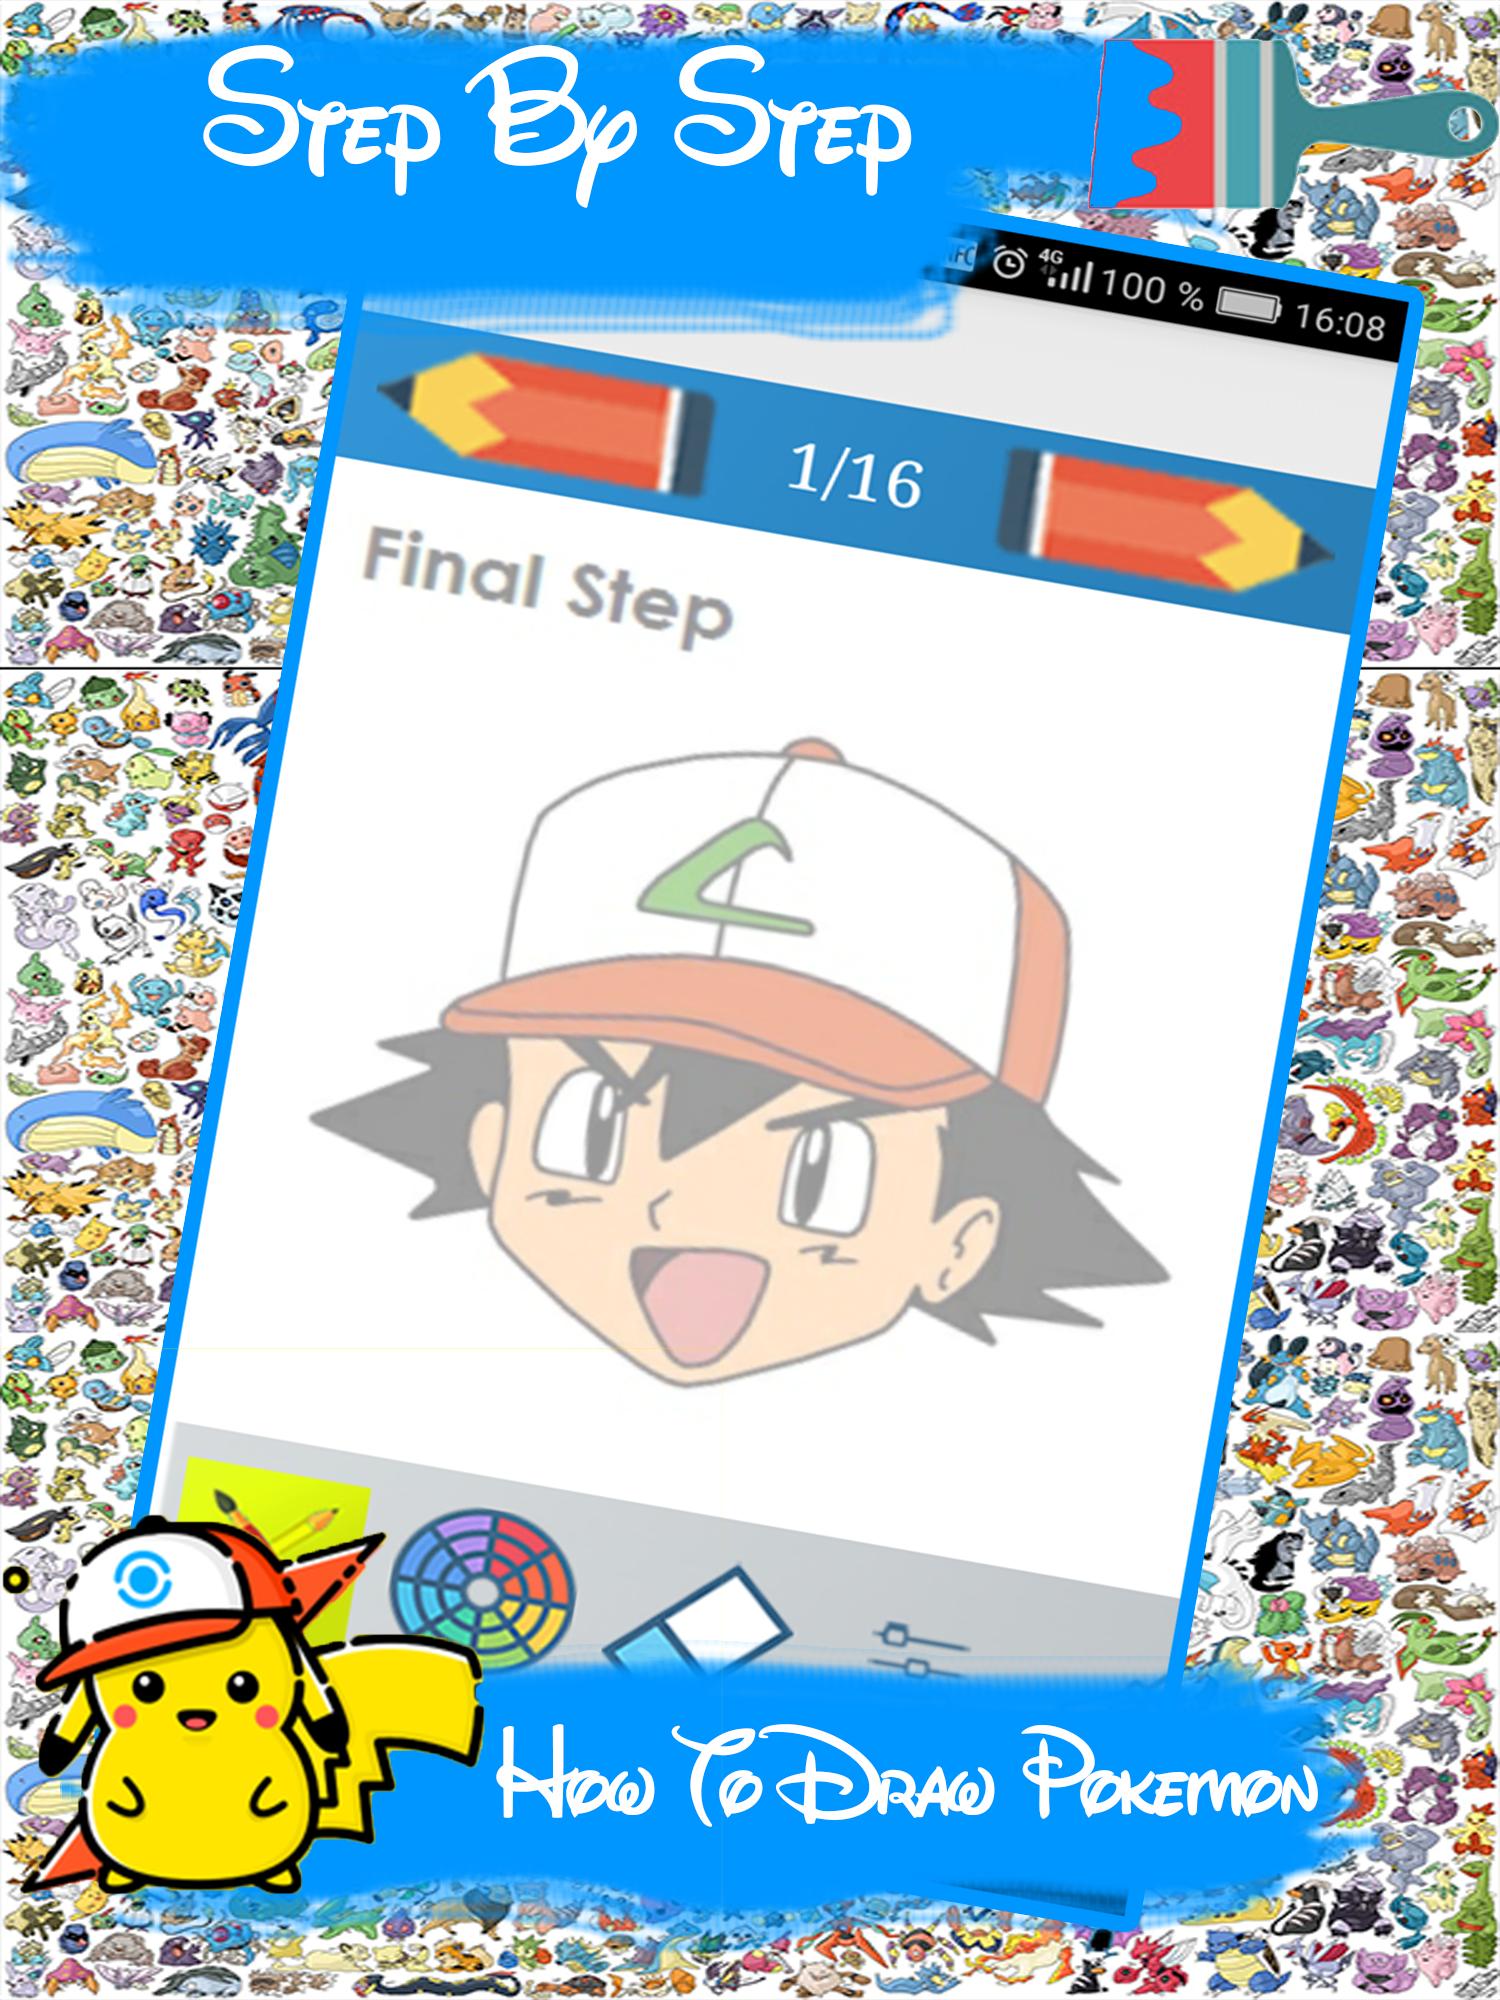 How To Draw Pokemon for Android - APK Download